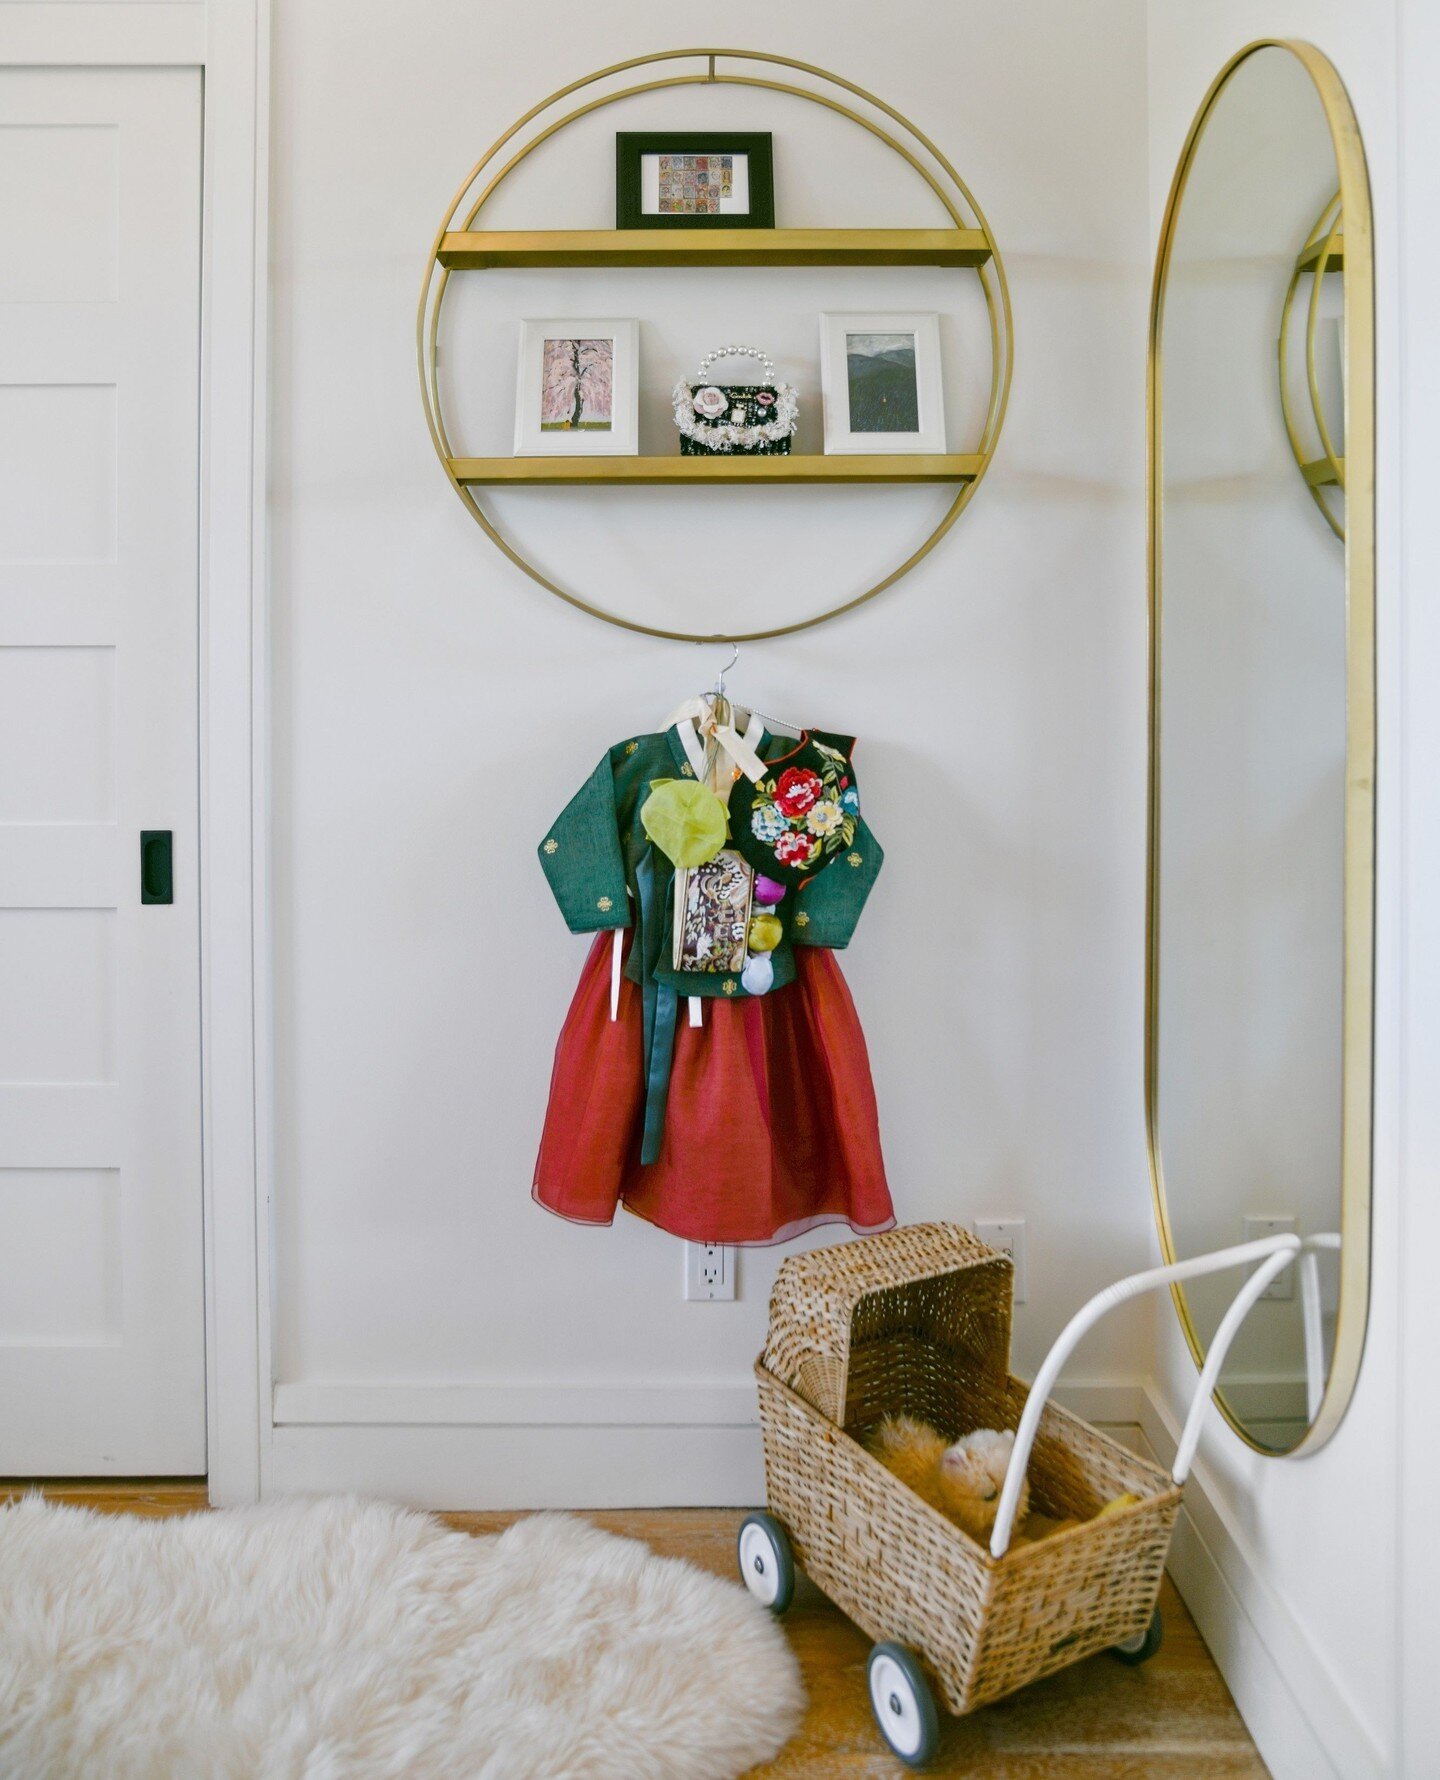 A quiet moment in a little girl's bedroom corner. She adored gazing at her very special and ceremonial Hanbok dress before drifting off to sleep. So it was hung right at her eye level which worked beautifully from a design perspective as well. I was 